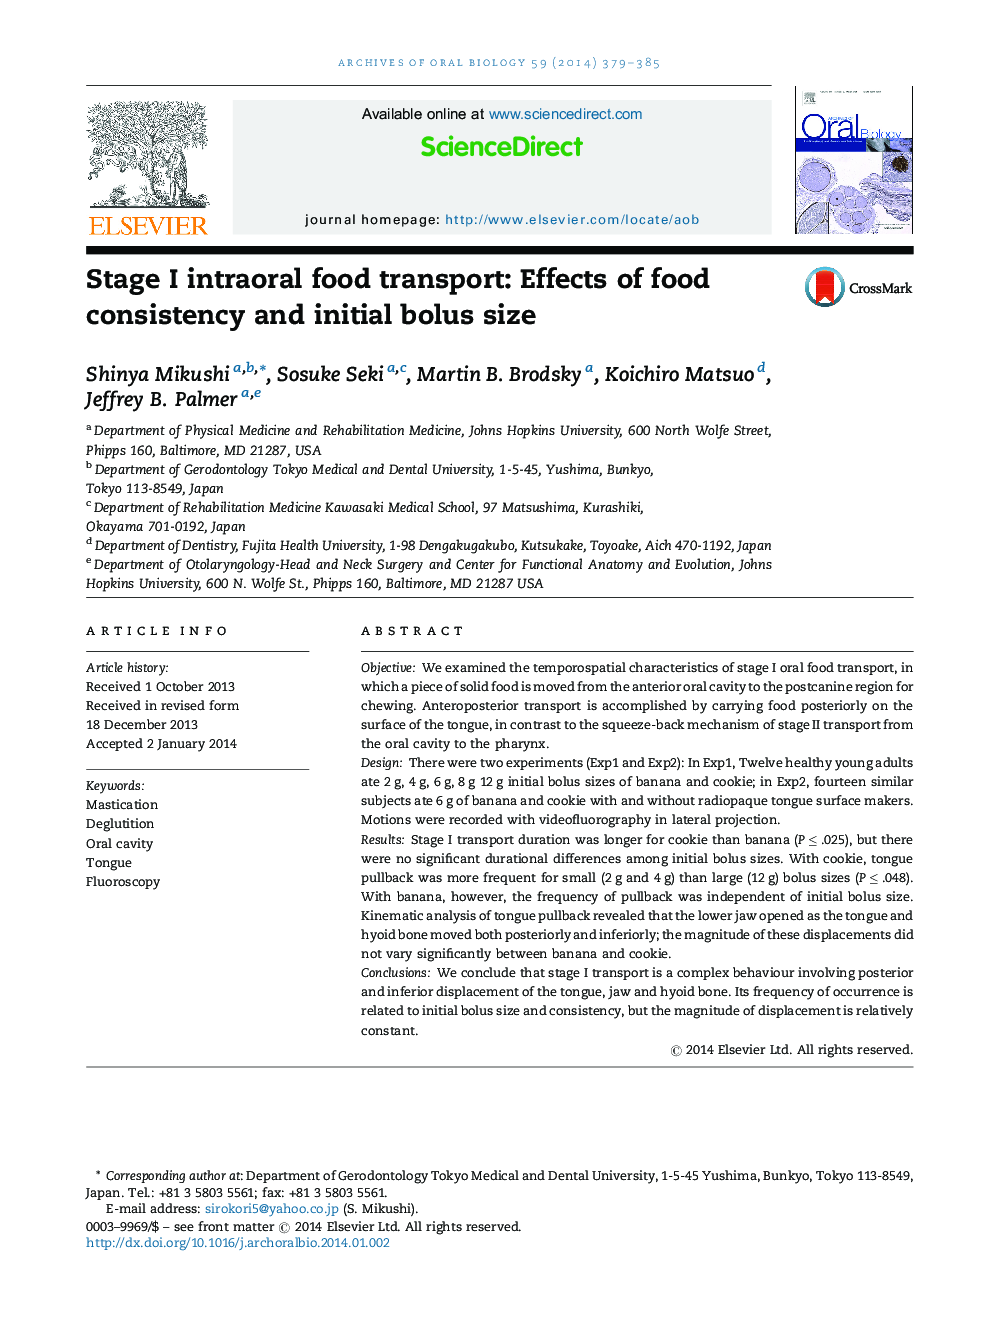 Stage I intraoral food transport: Effects of food consistency and initial bolus size